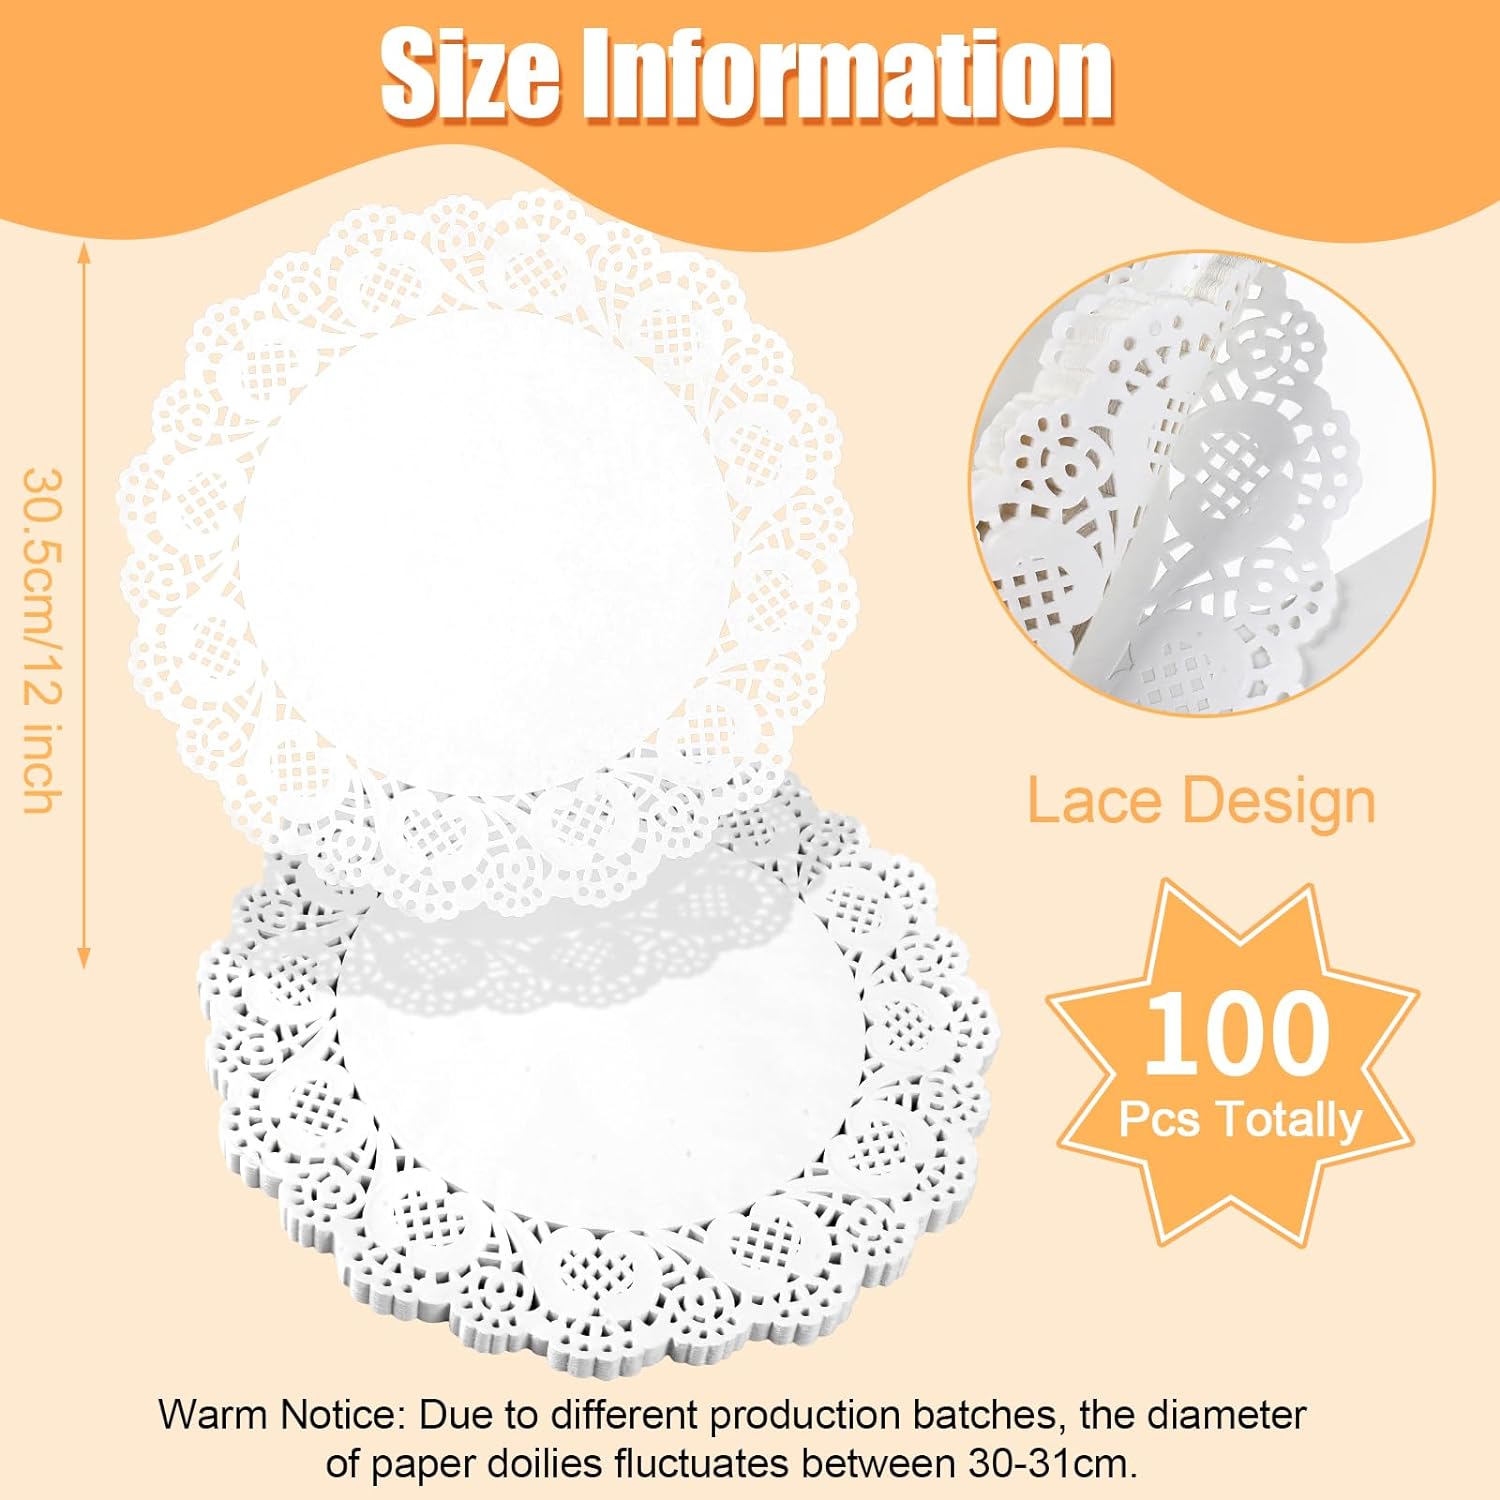 Bulk 100 Pcs 12 Inch Elegant Lace Round Paper Placemat Set: Ideal for Weddings Birthdays Cakes Desserts Light Brown Cutlery Perfect for Food Formal Events Wholesale